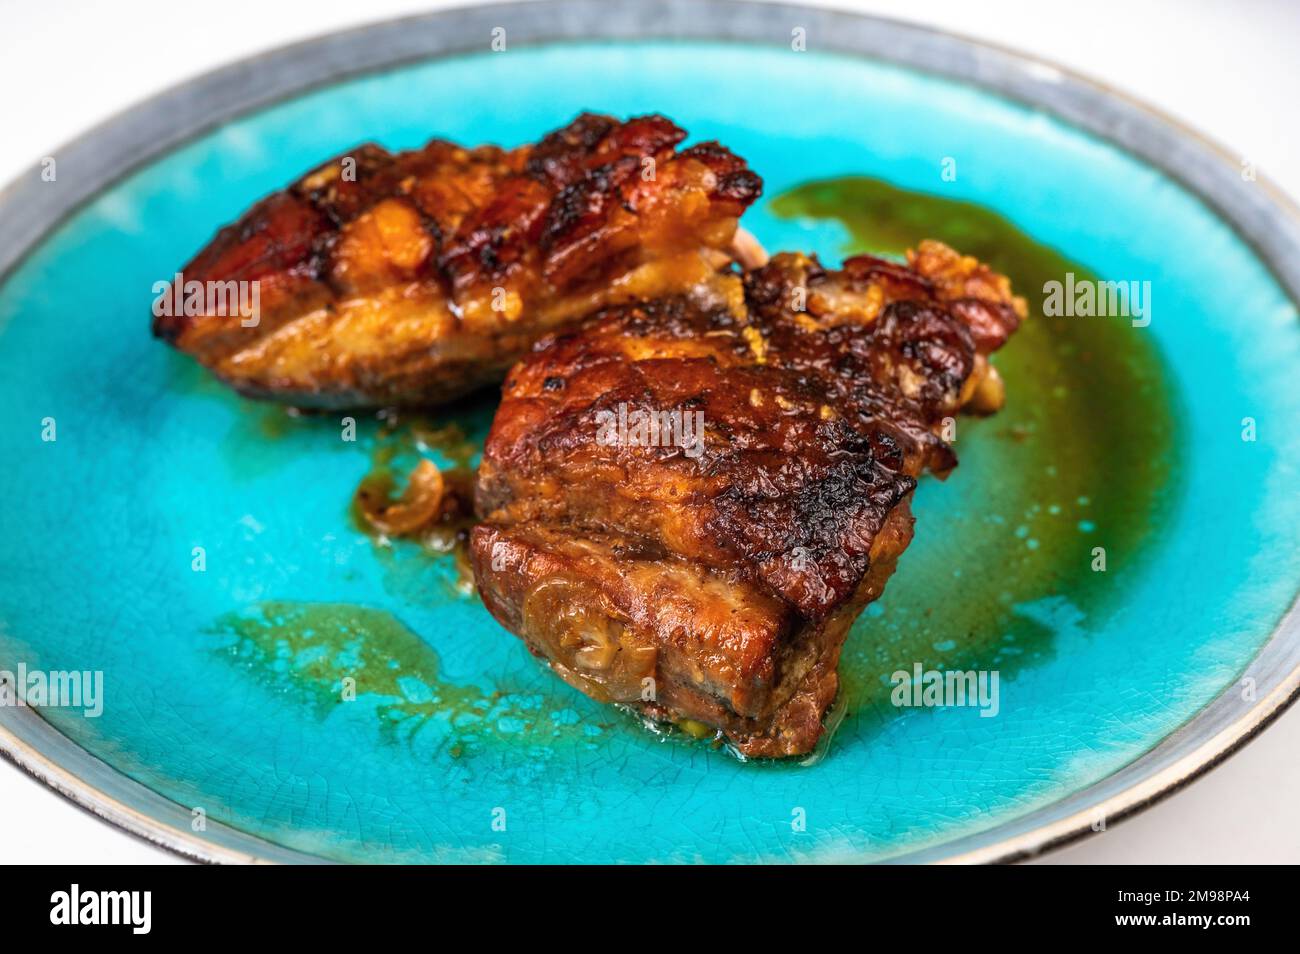 Two piece of baked pork belly with crispy skin on blue plate, closeup. Stock Photo